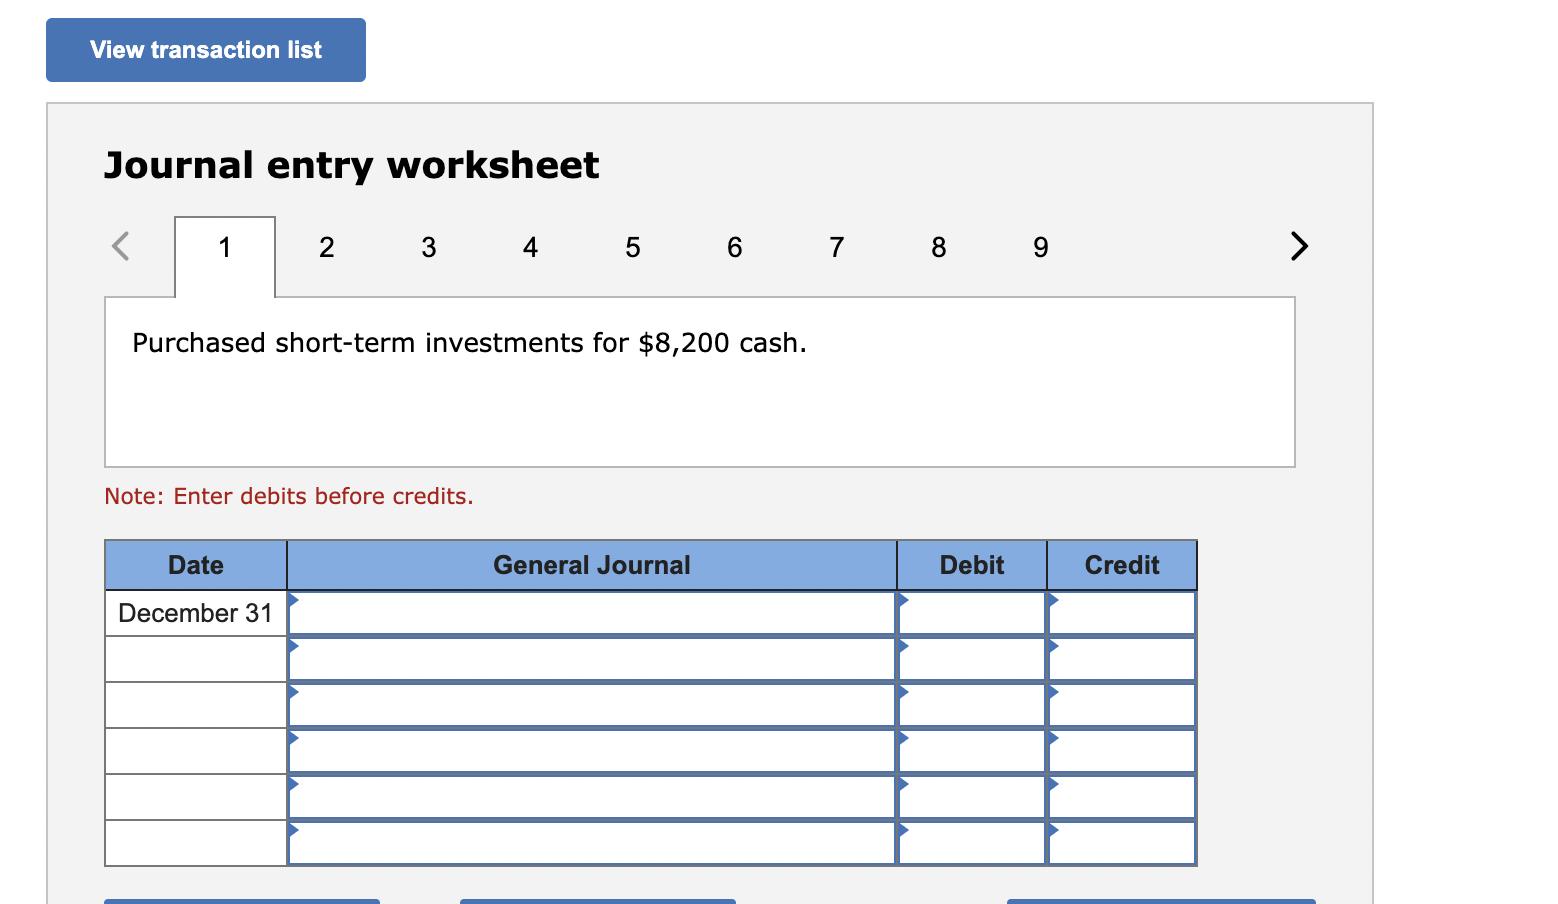 Journal entry worksheet 56 Purchased short-term investments for ( $ 8,200 ) cash. Note: Enter debits before credits.